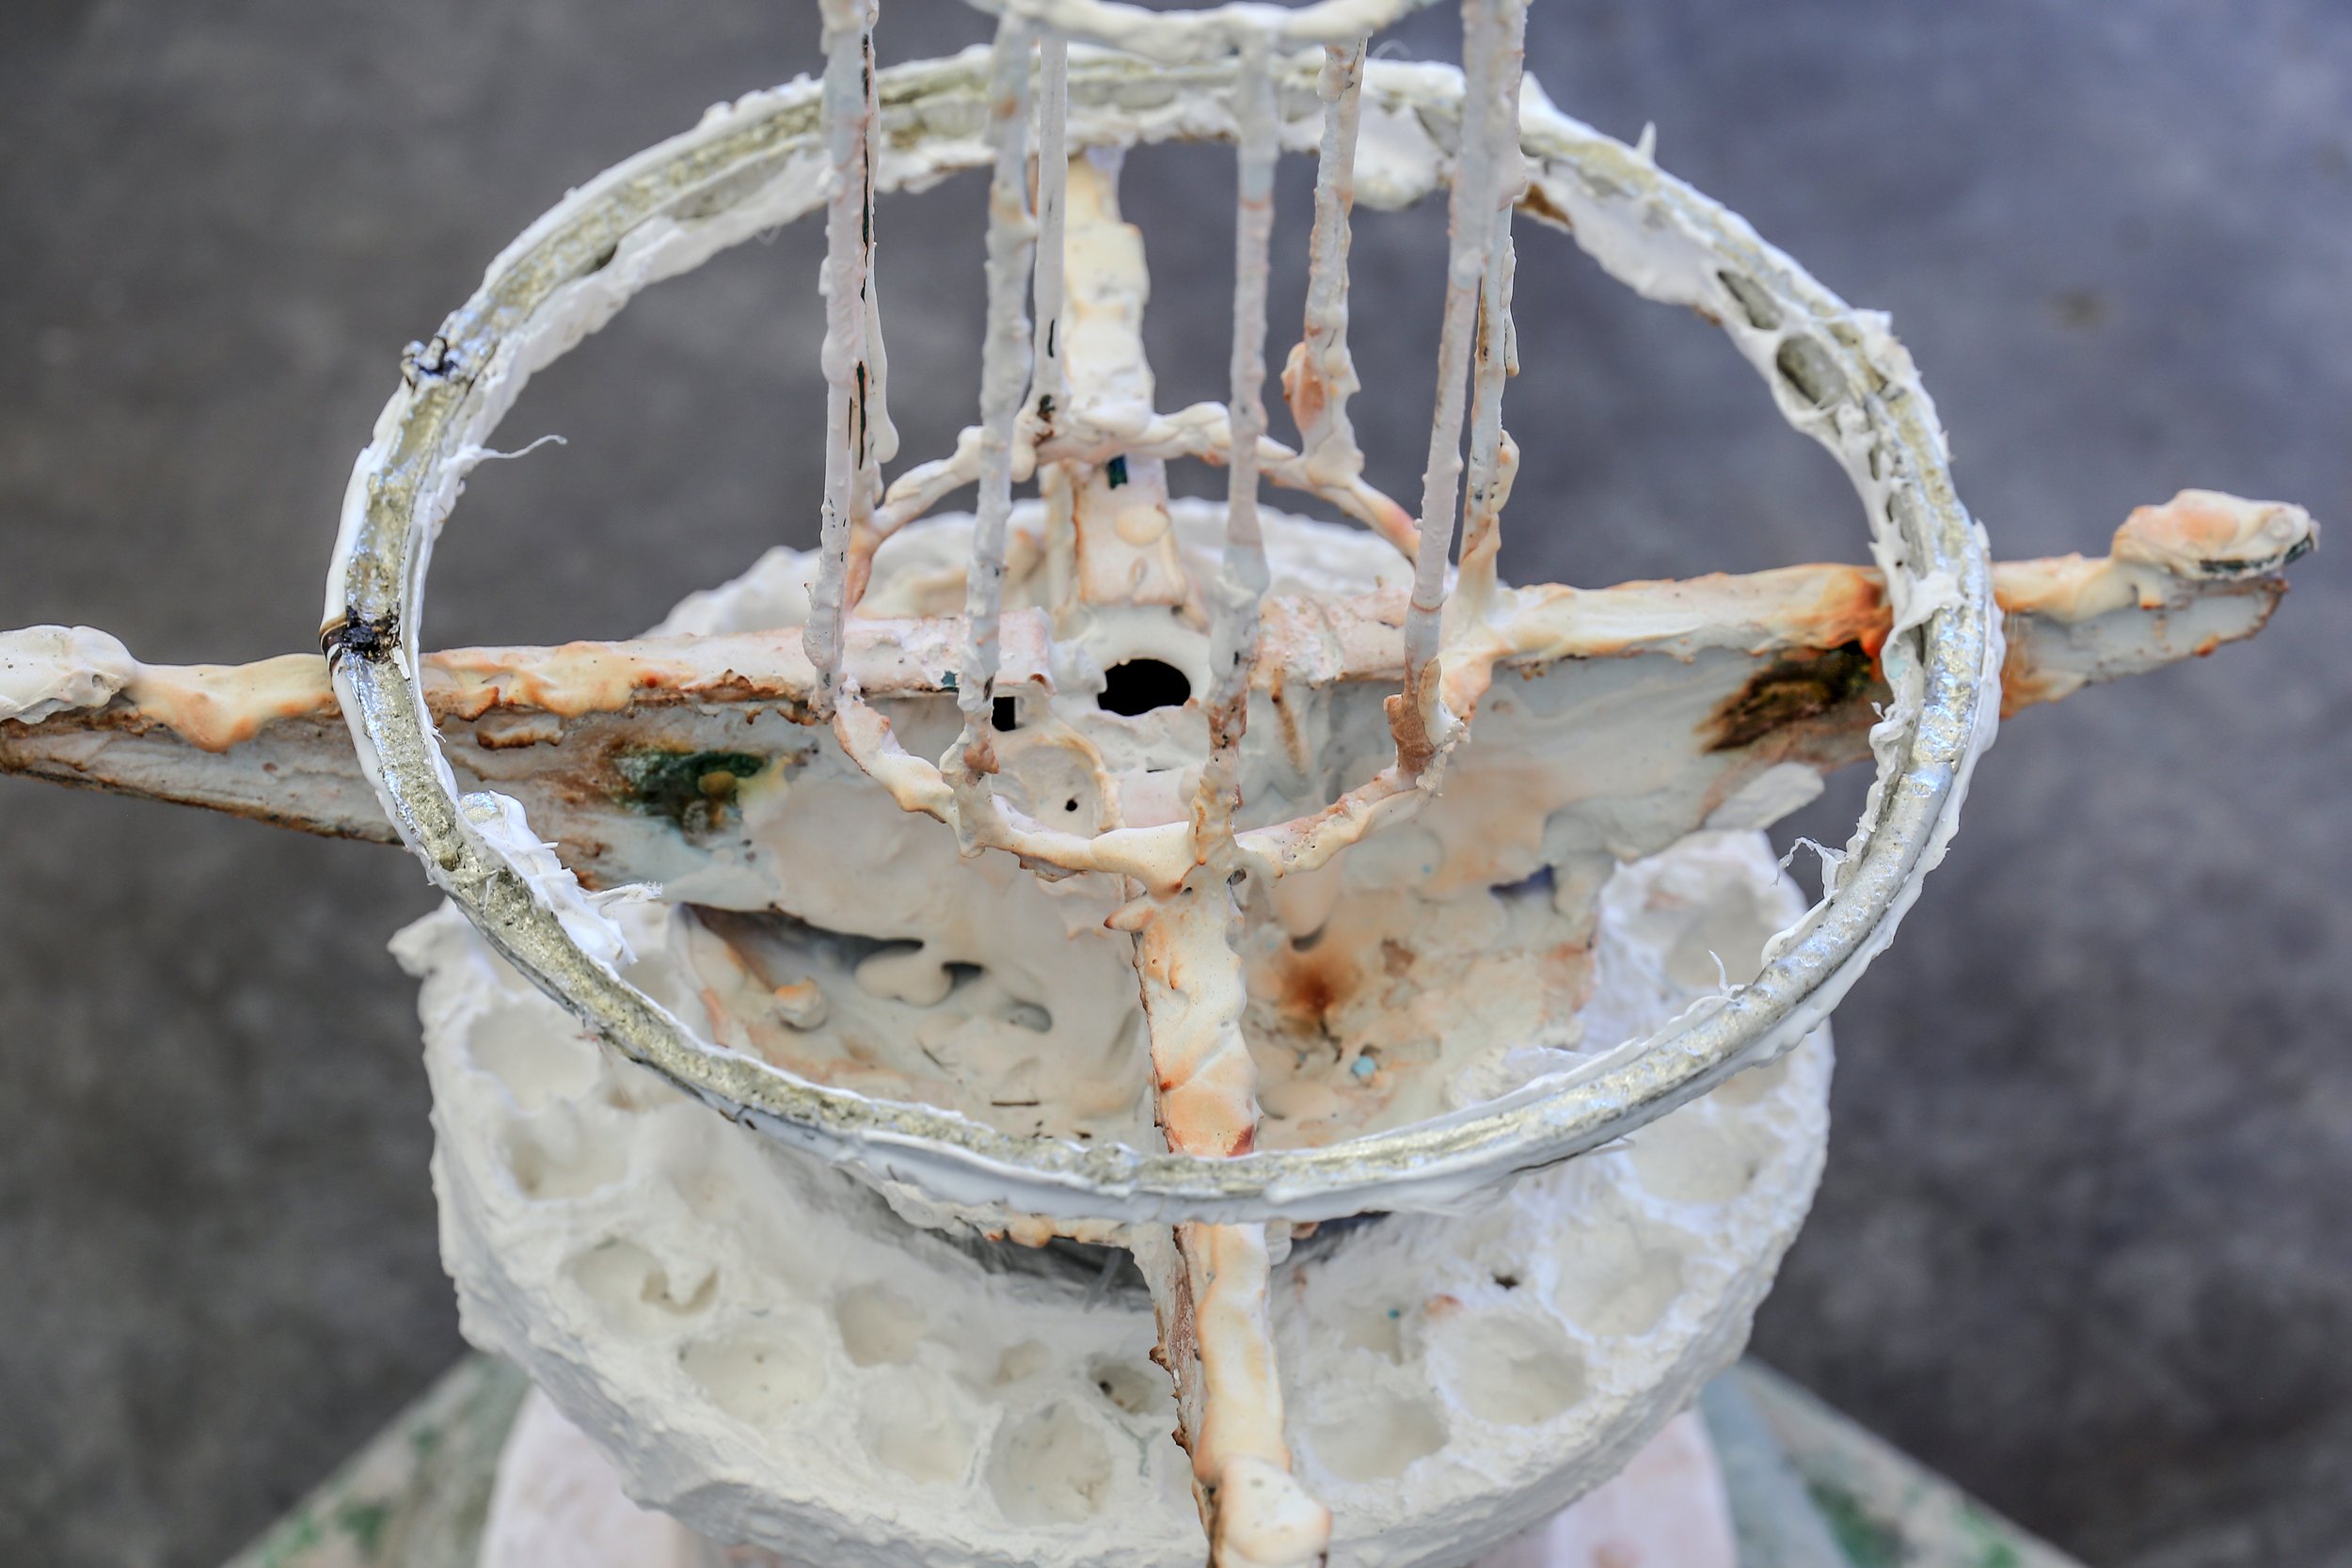  Moth (detail,) 2022, found objects, tiles, grout, pewter, plastic, plaster, pigment, 620 x 390 x 390  Photo credit: Vicki Piper 